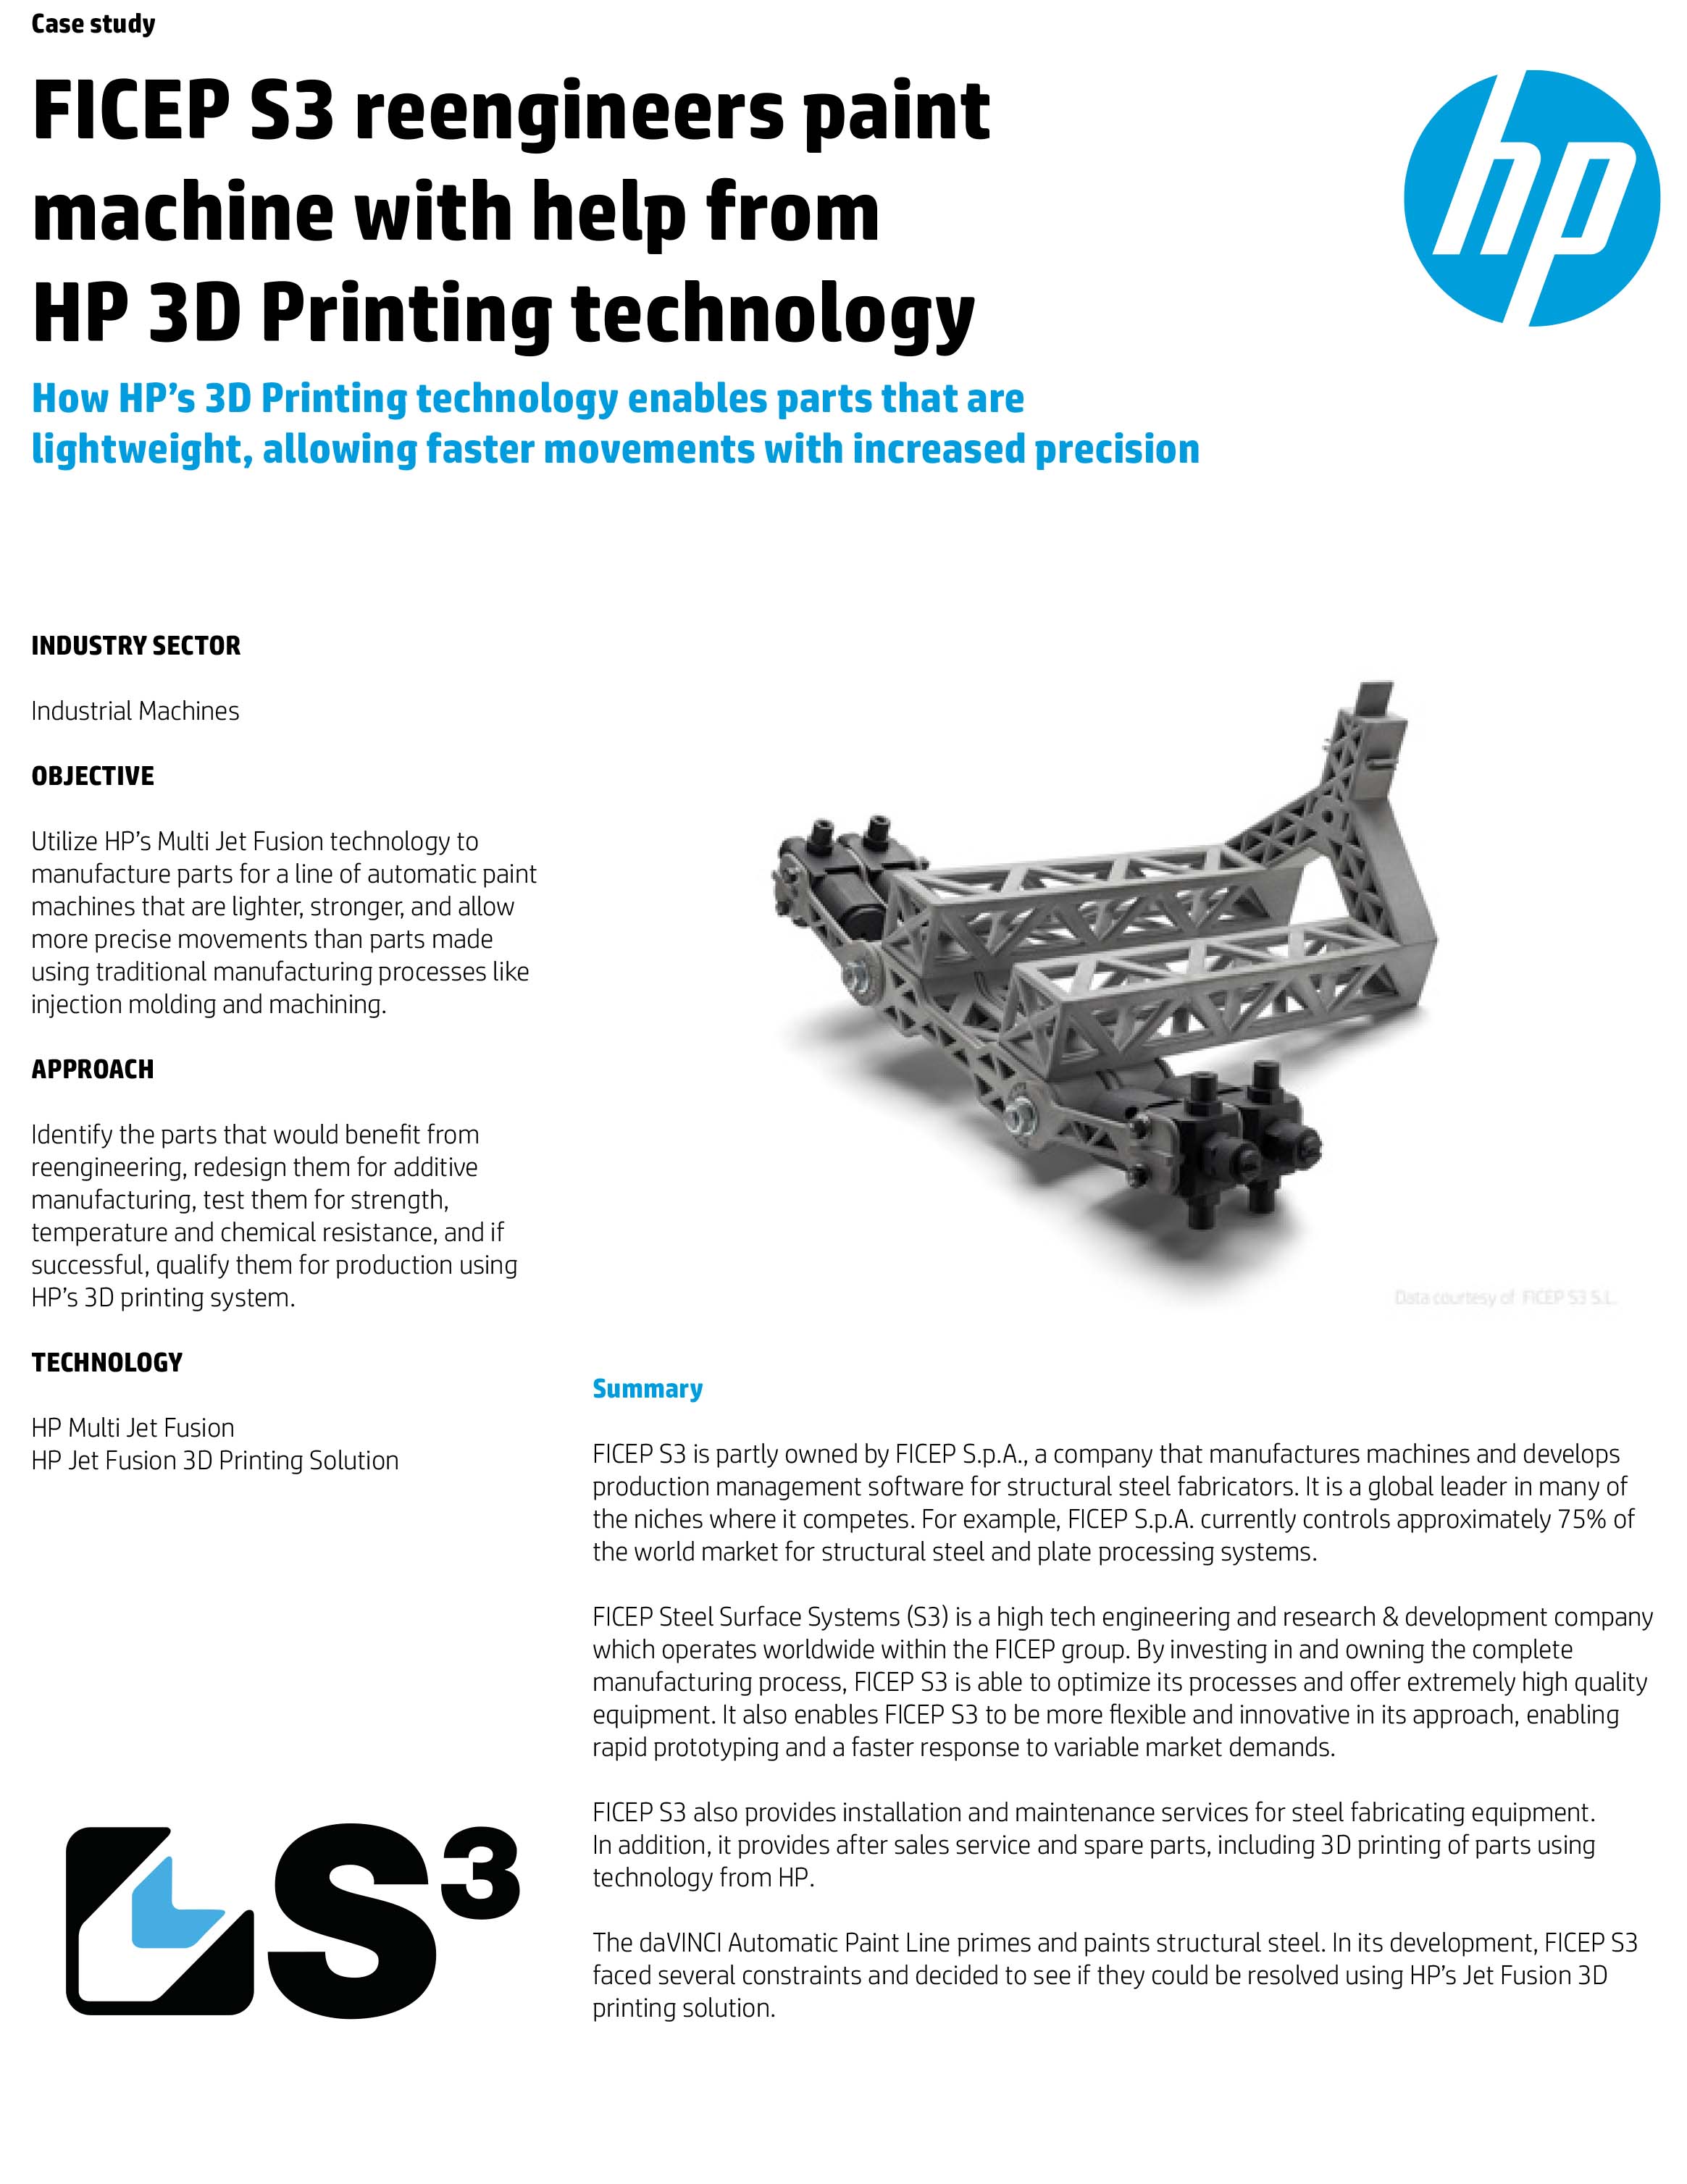 FICEP S3 reengineers paint machine with help from HP 3D Printing technology